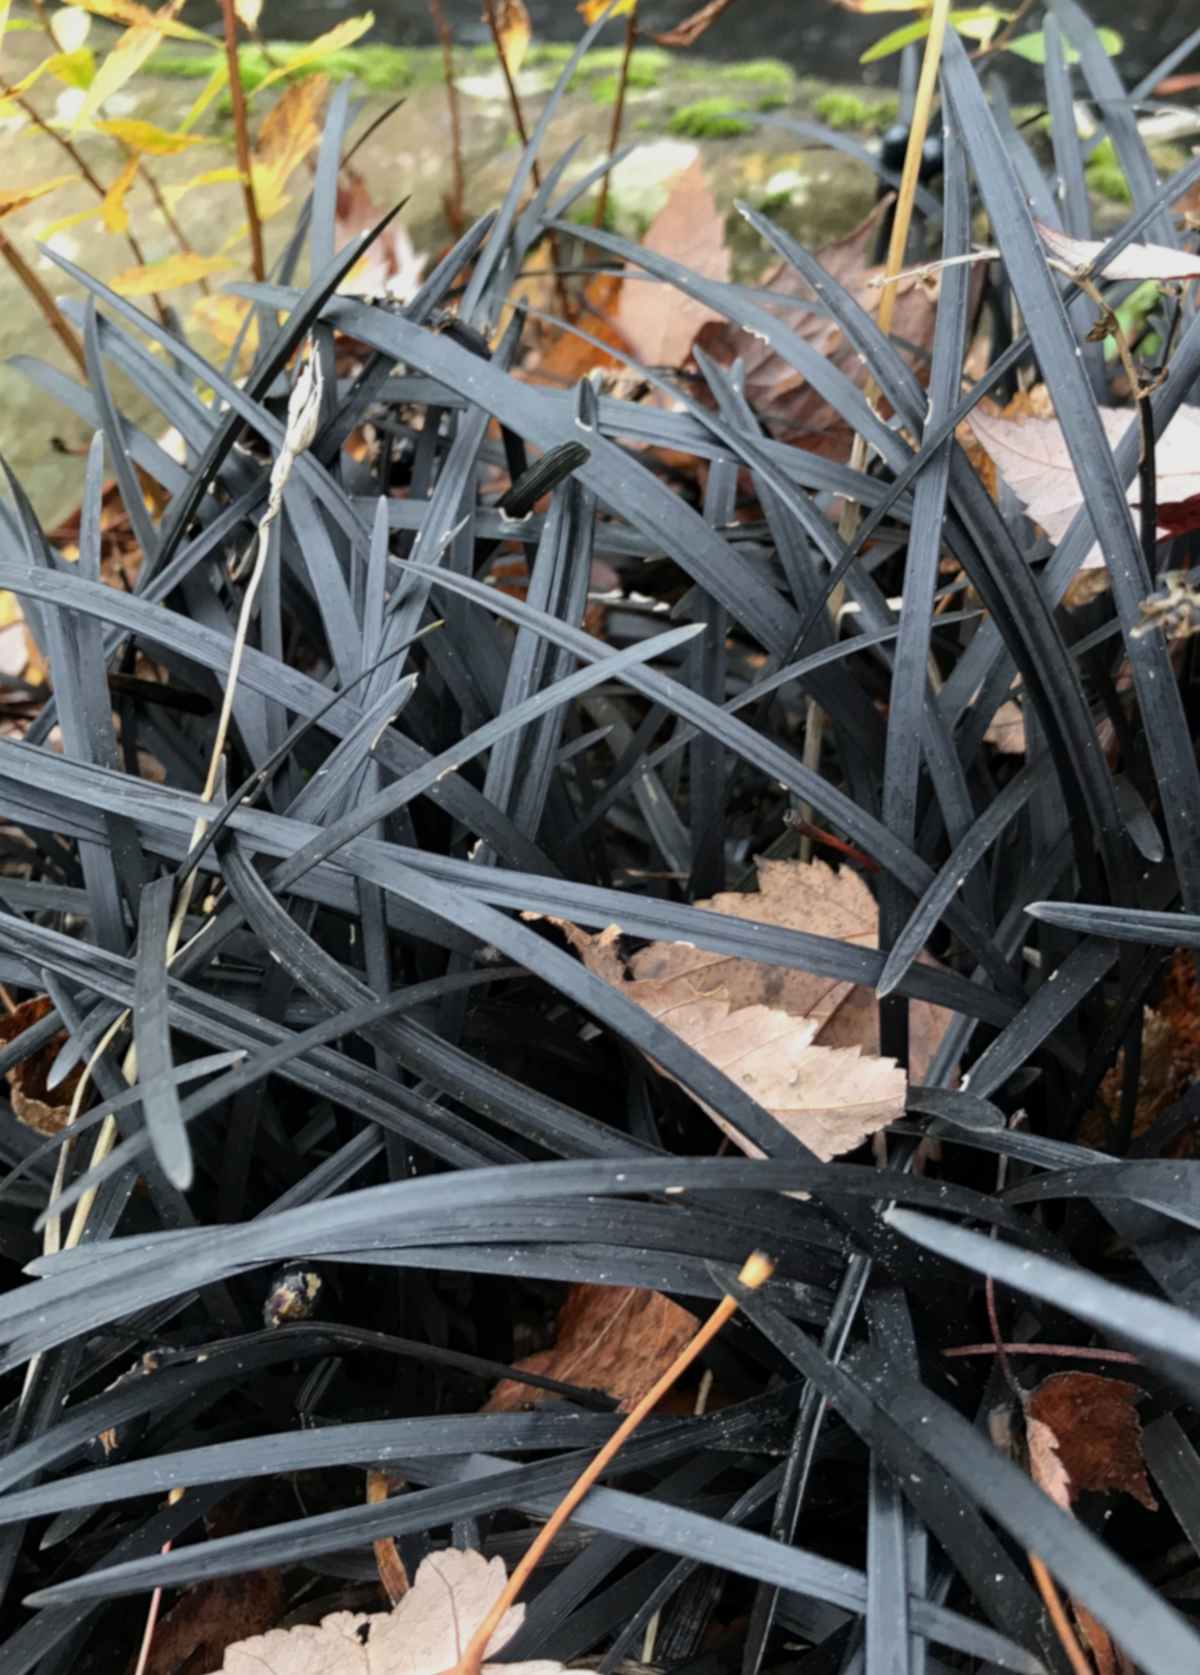 Black strands of grass with a few leaves